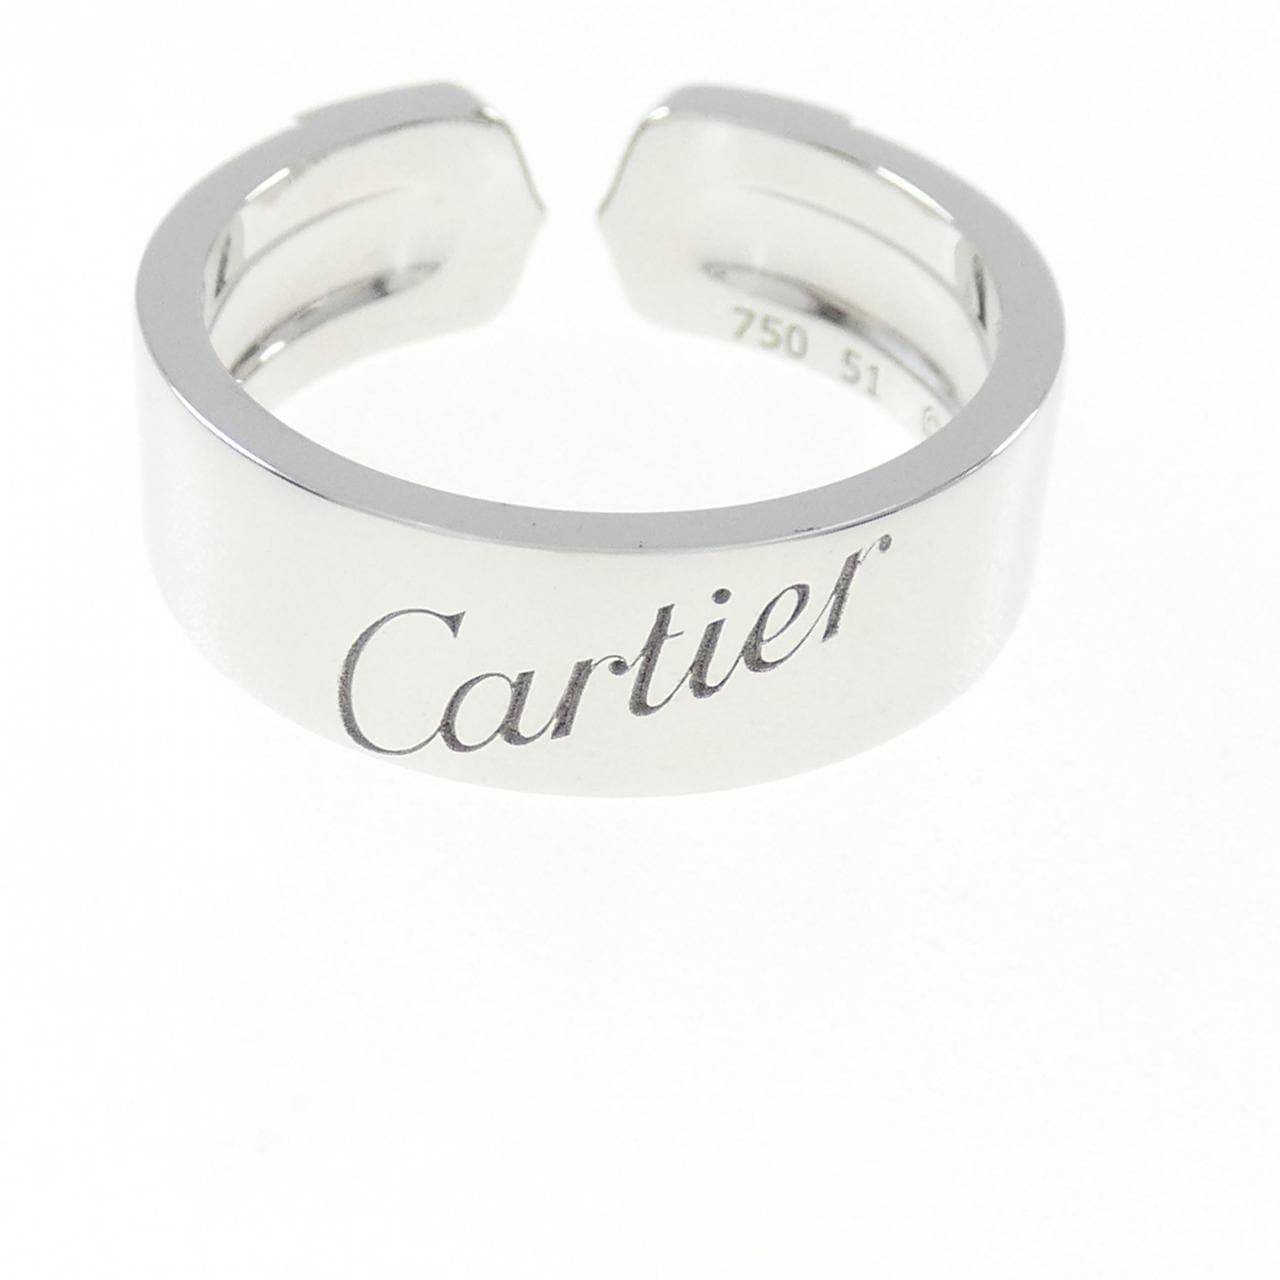 Cartier C2 2007 Ring